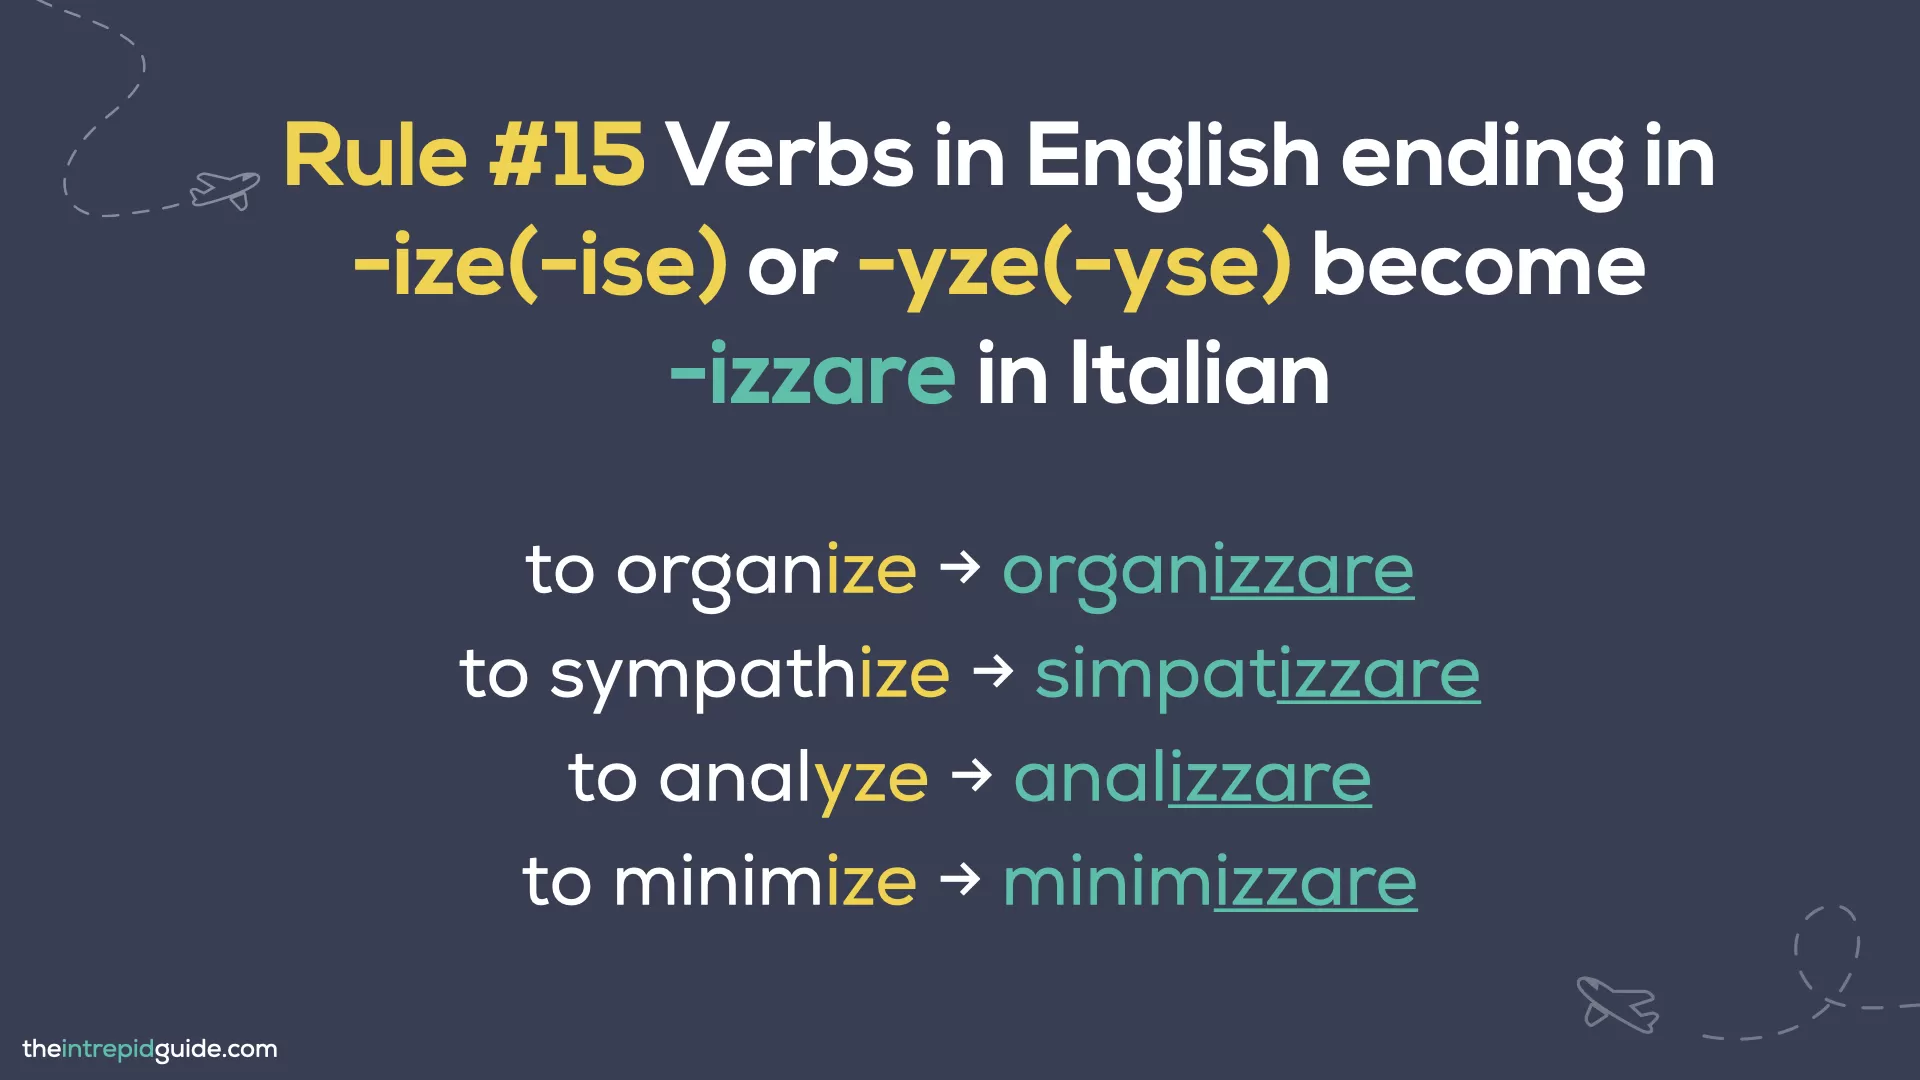 Italian cognates and loan words - Rule 15 - Verbs in English ending in -ize or -yze become -izzare in Italian